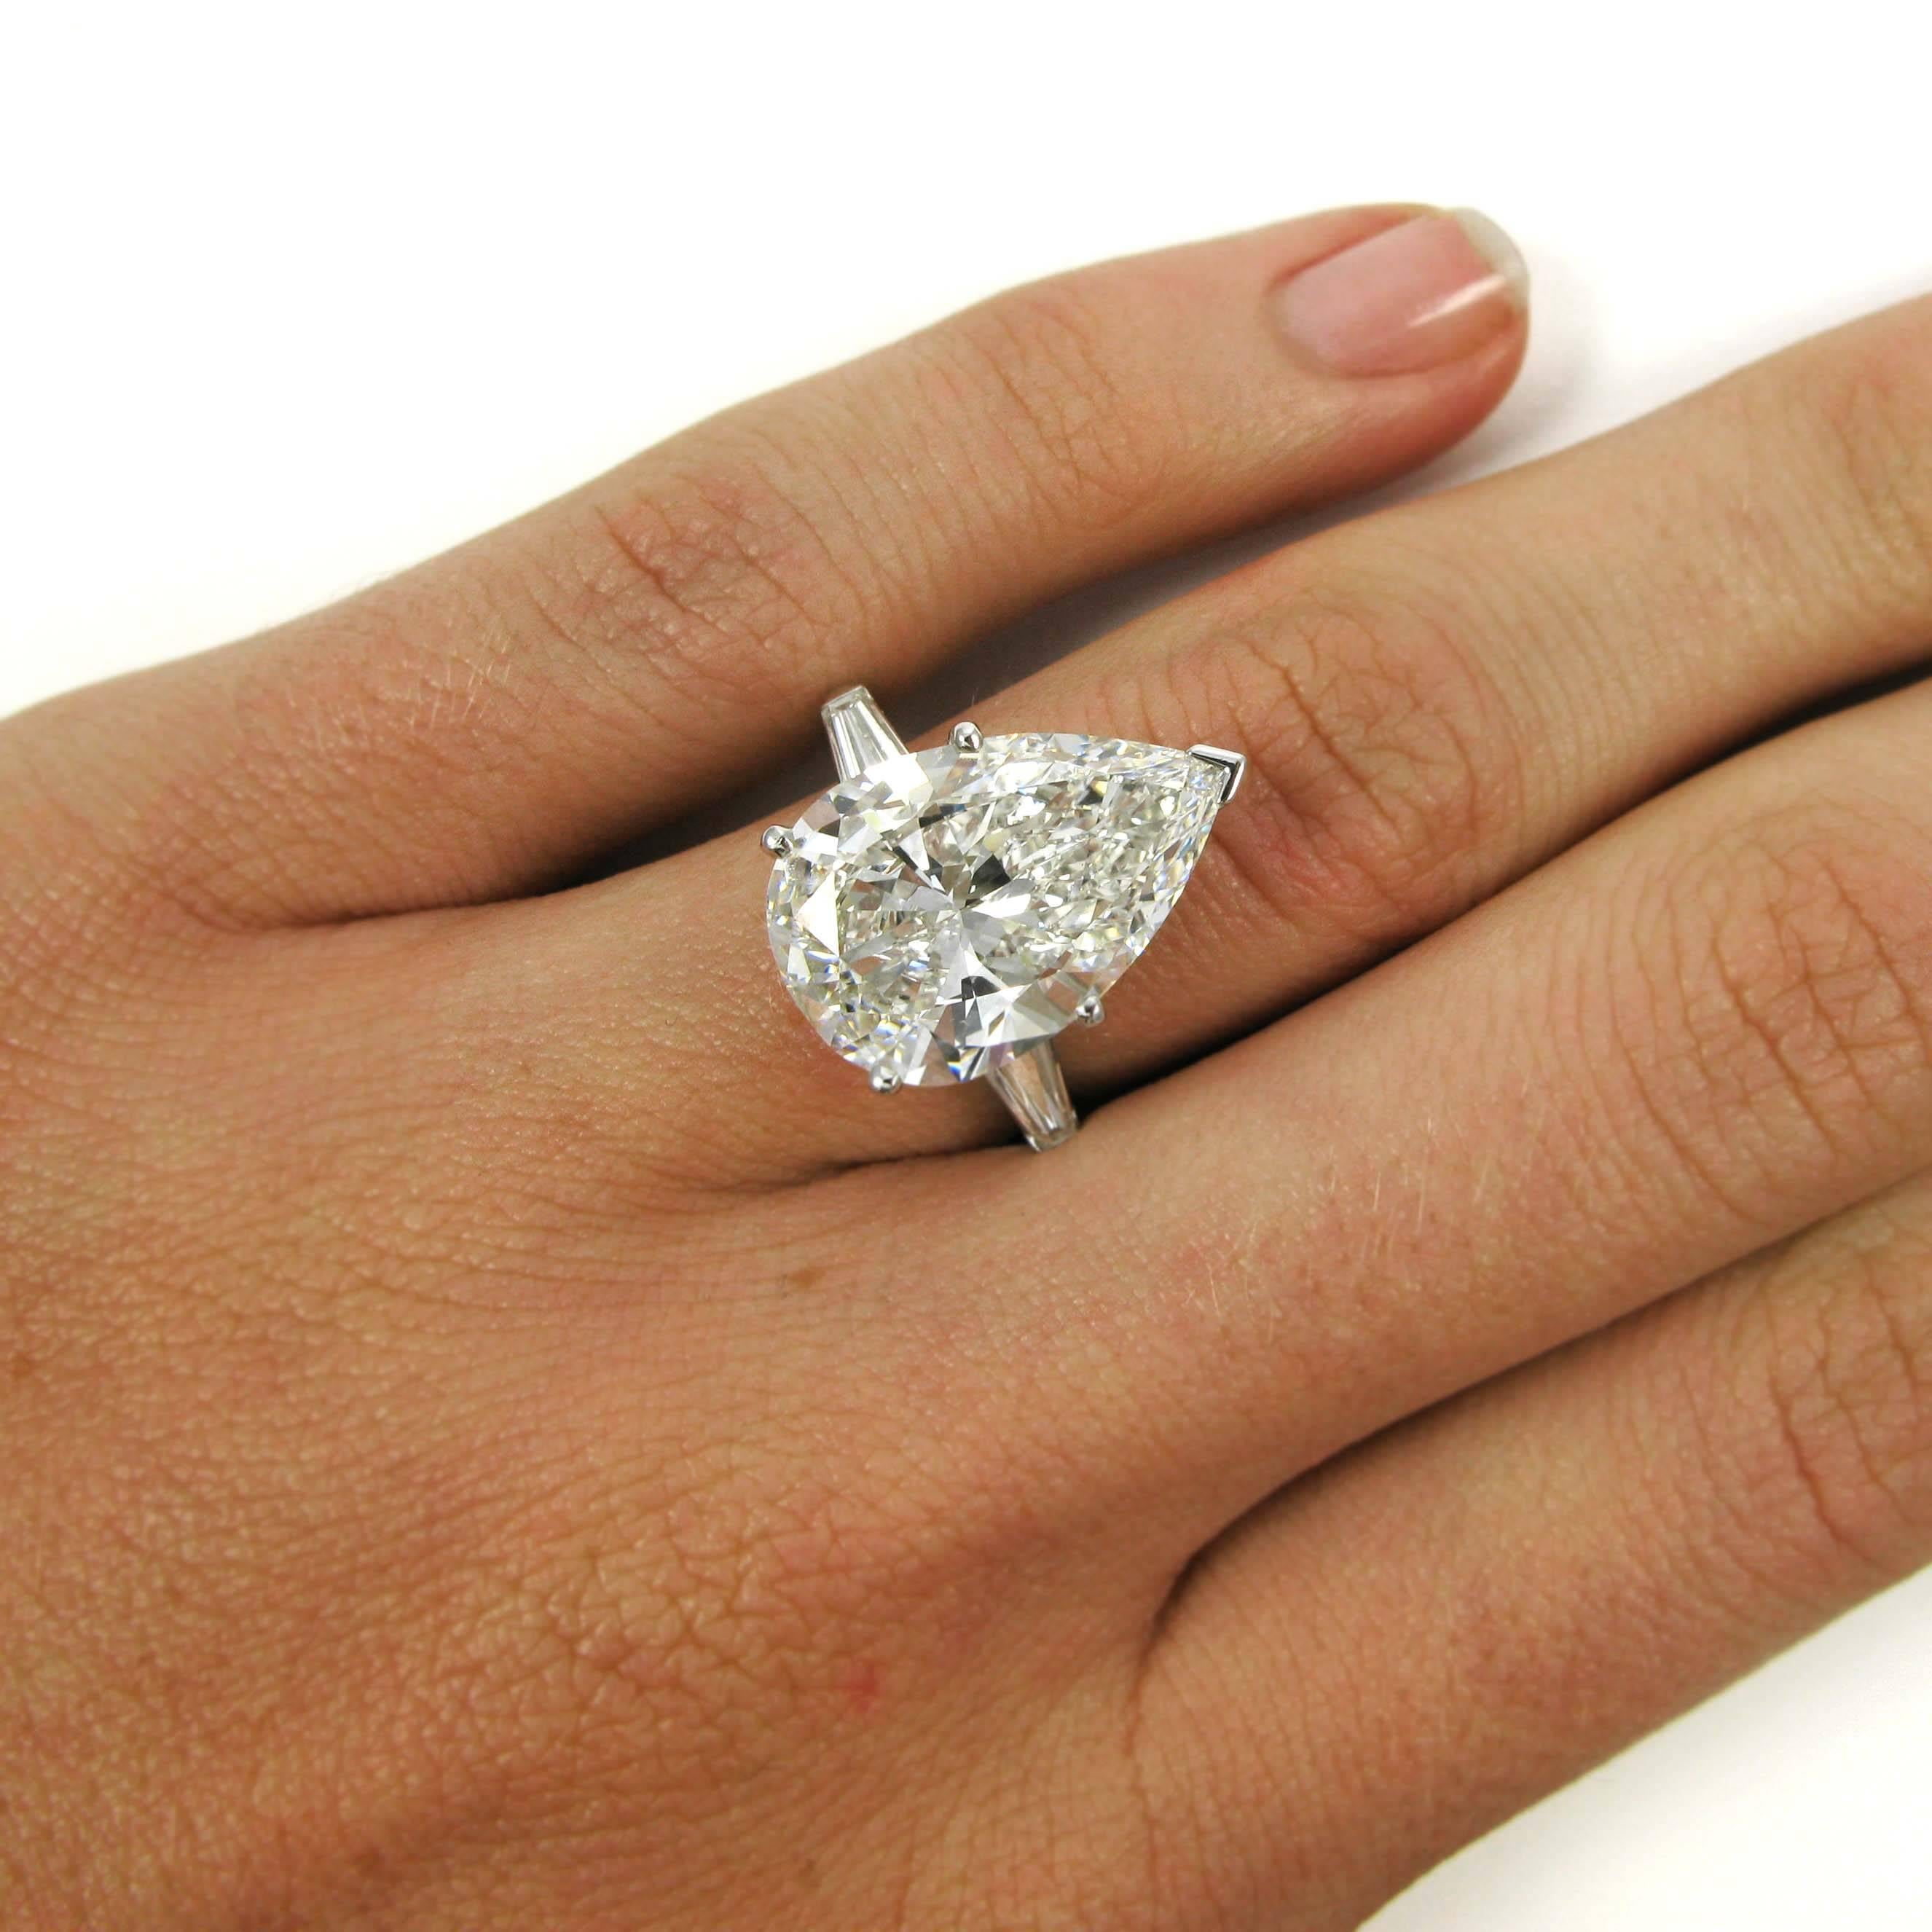 An impressive 8.14 carat pear shape diamond with G color and VS2 clarity is simply set in a classic platinum J Birnbach mounting with two tapered baguette-cut diamonds bar-set into the raised shoulders. 

Purchase includes GIA Diamond Grading Report